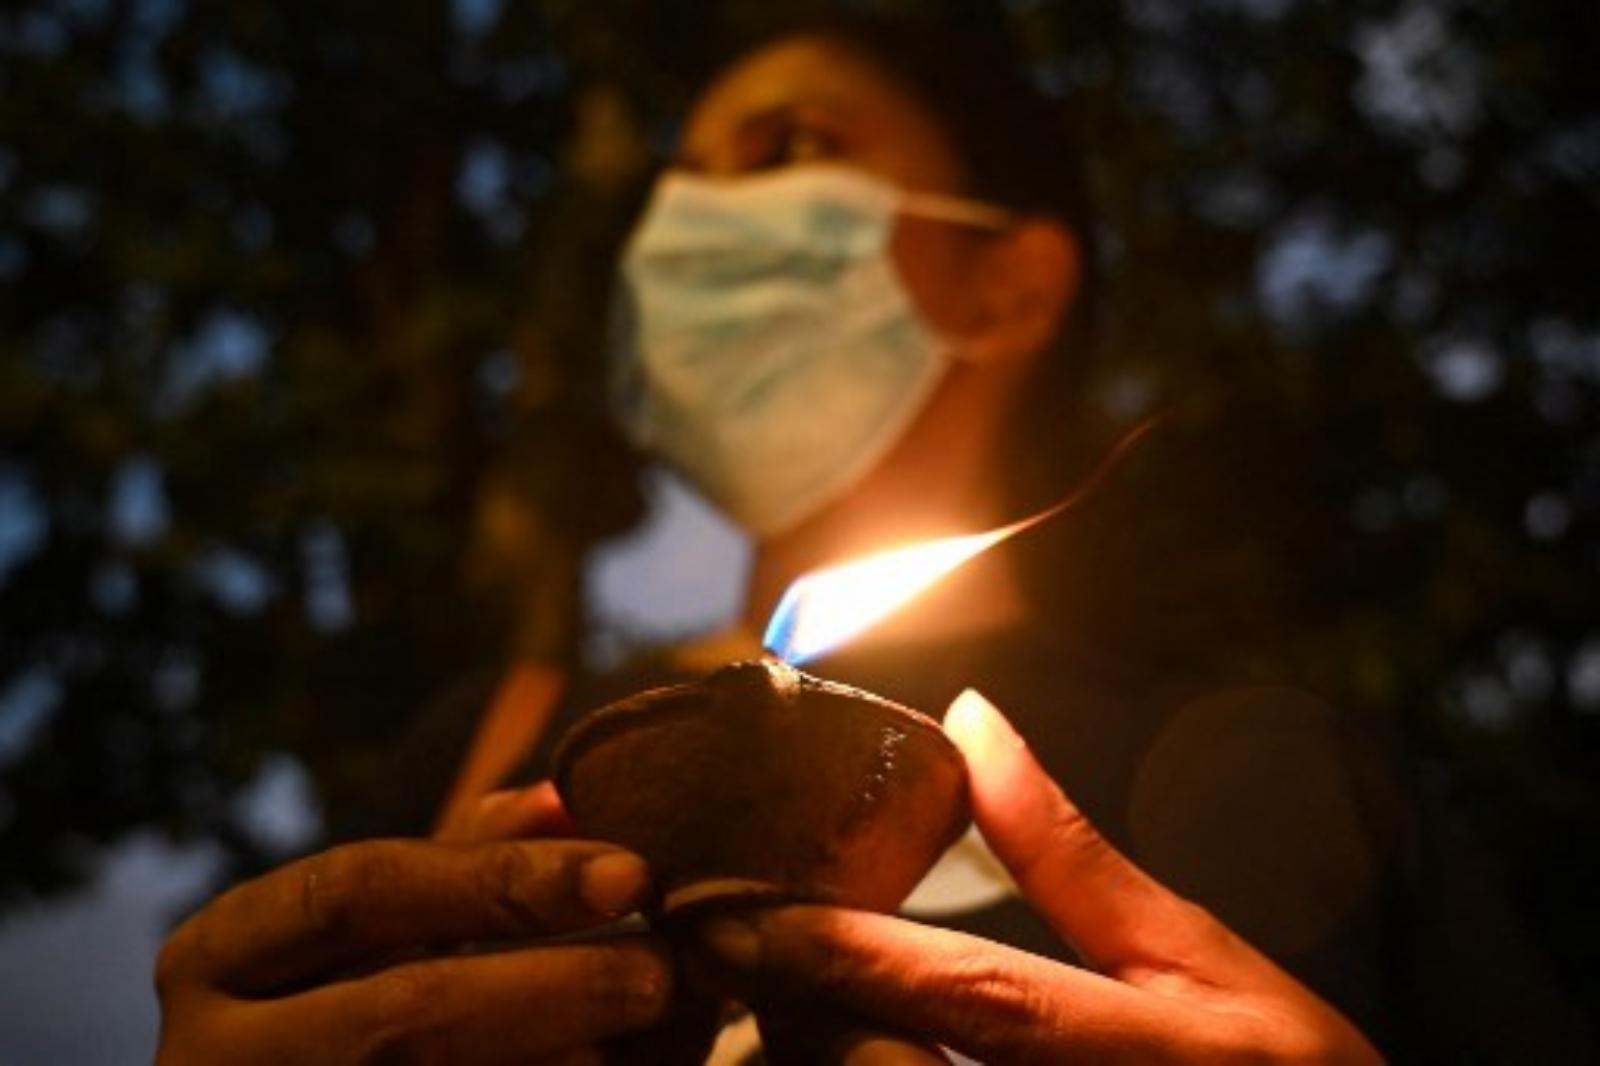 A protestor holds an oil lamp during a demonstration against the surge in prices and shortage of fuel and other essential commodities.